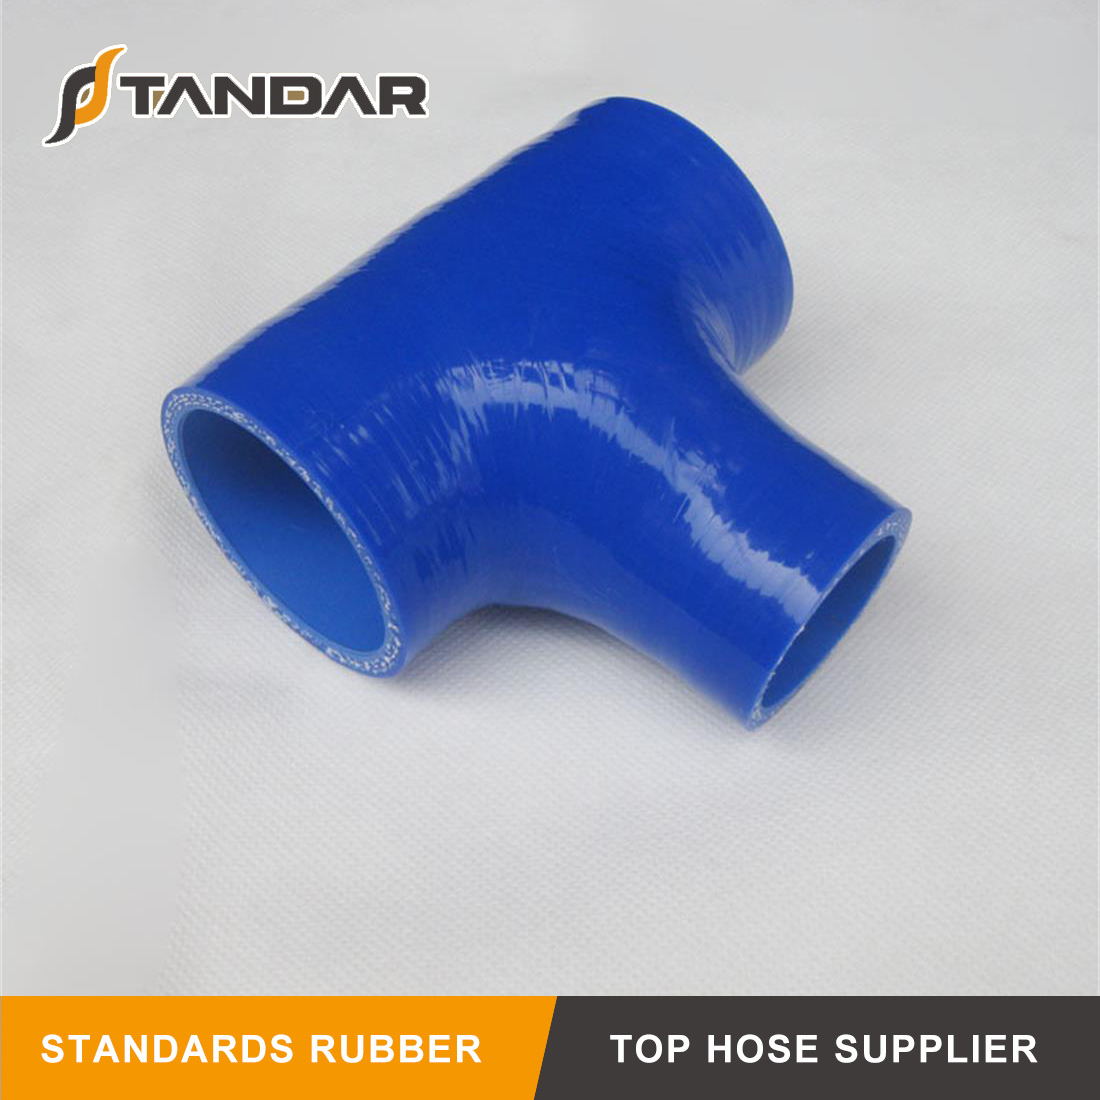 High Pressure Braided T-Shaped Silicone Radiator Hose for Auto Parts